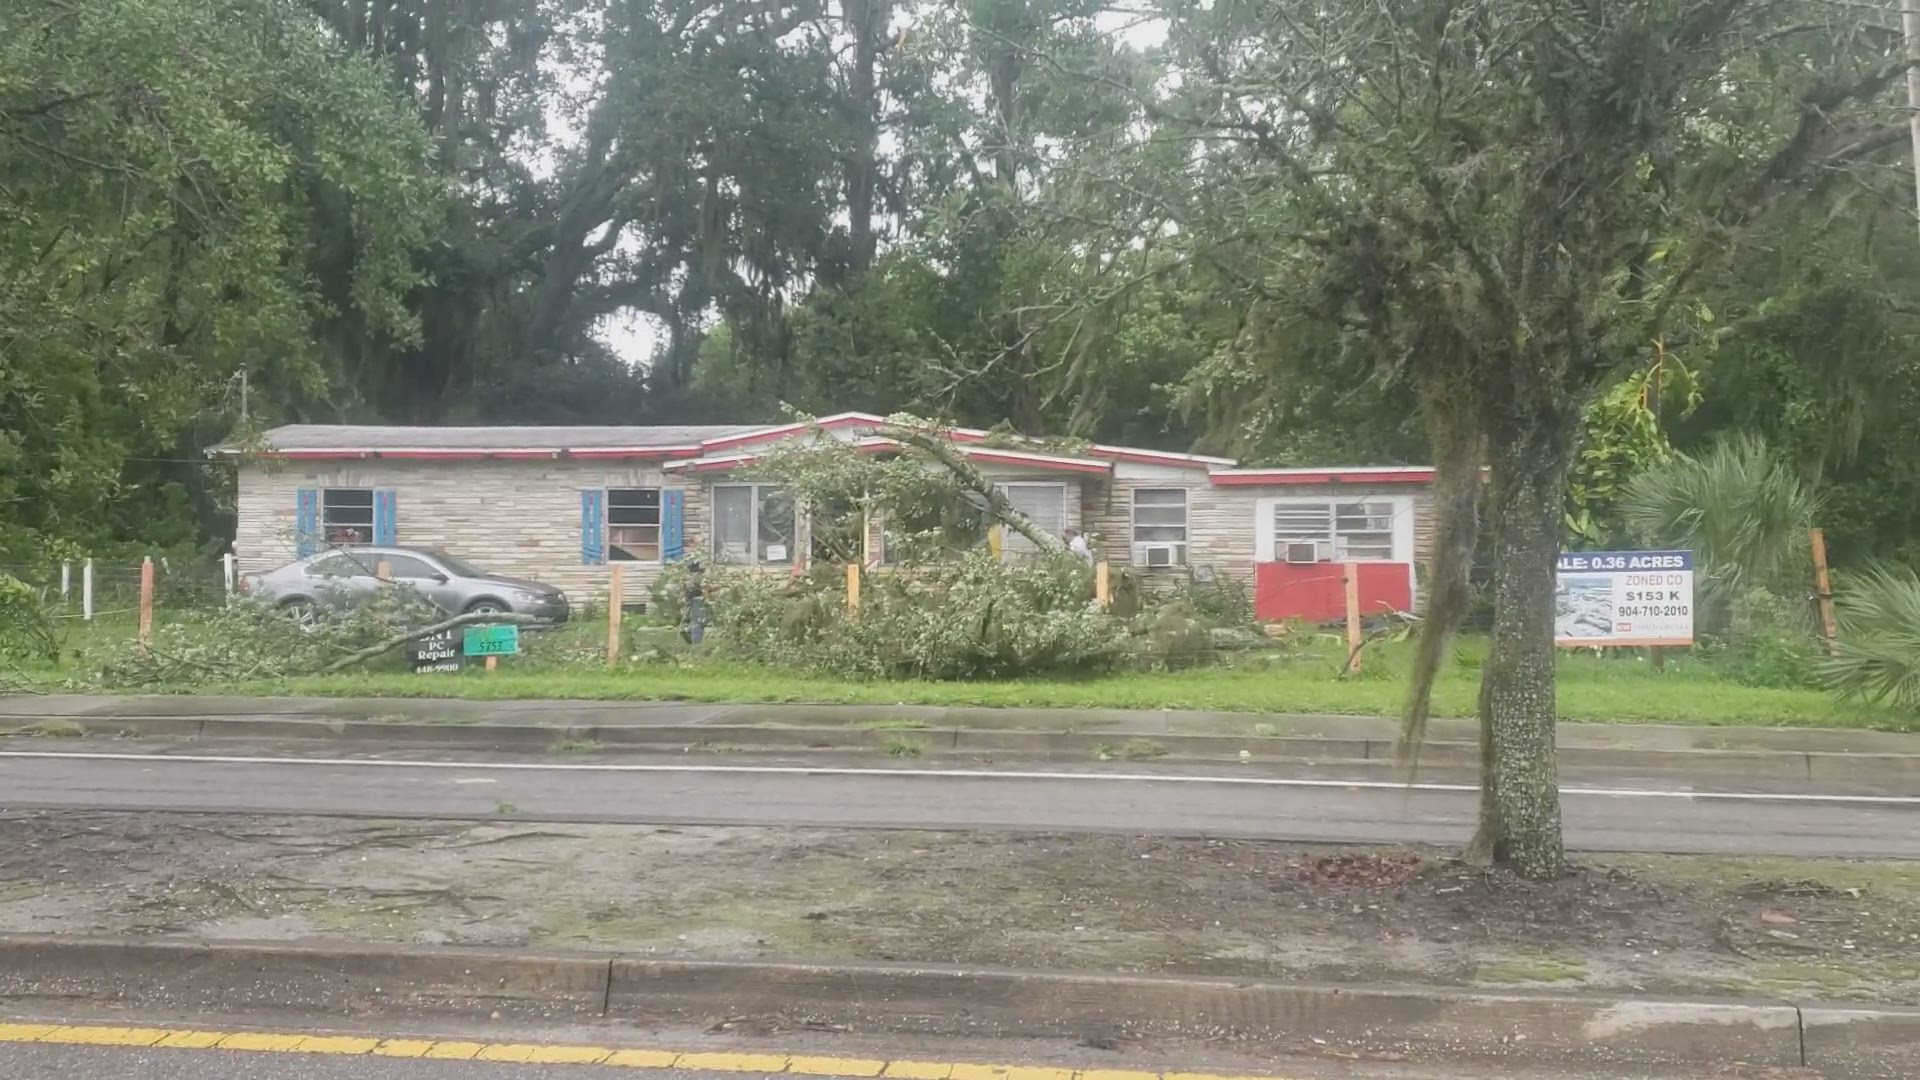 Emergency crews in Jacksonville are responding to downed trees and powerlines in the area of Spring Park Road.
Credit: Dawn White